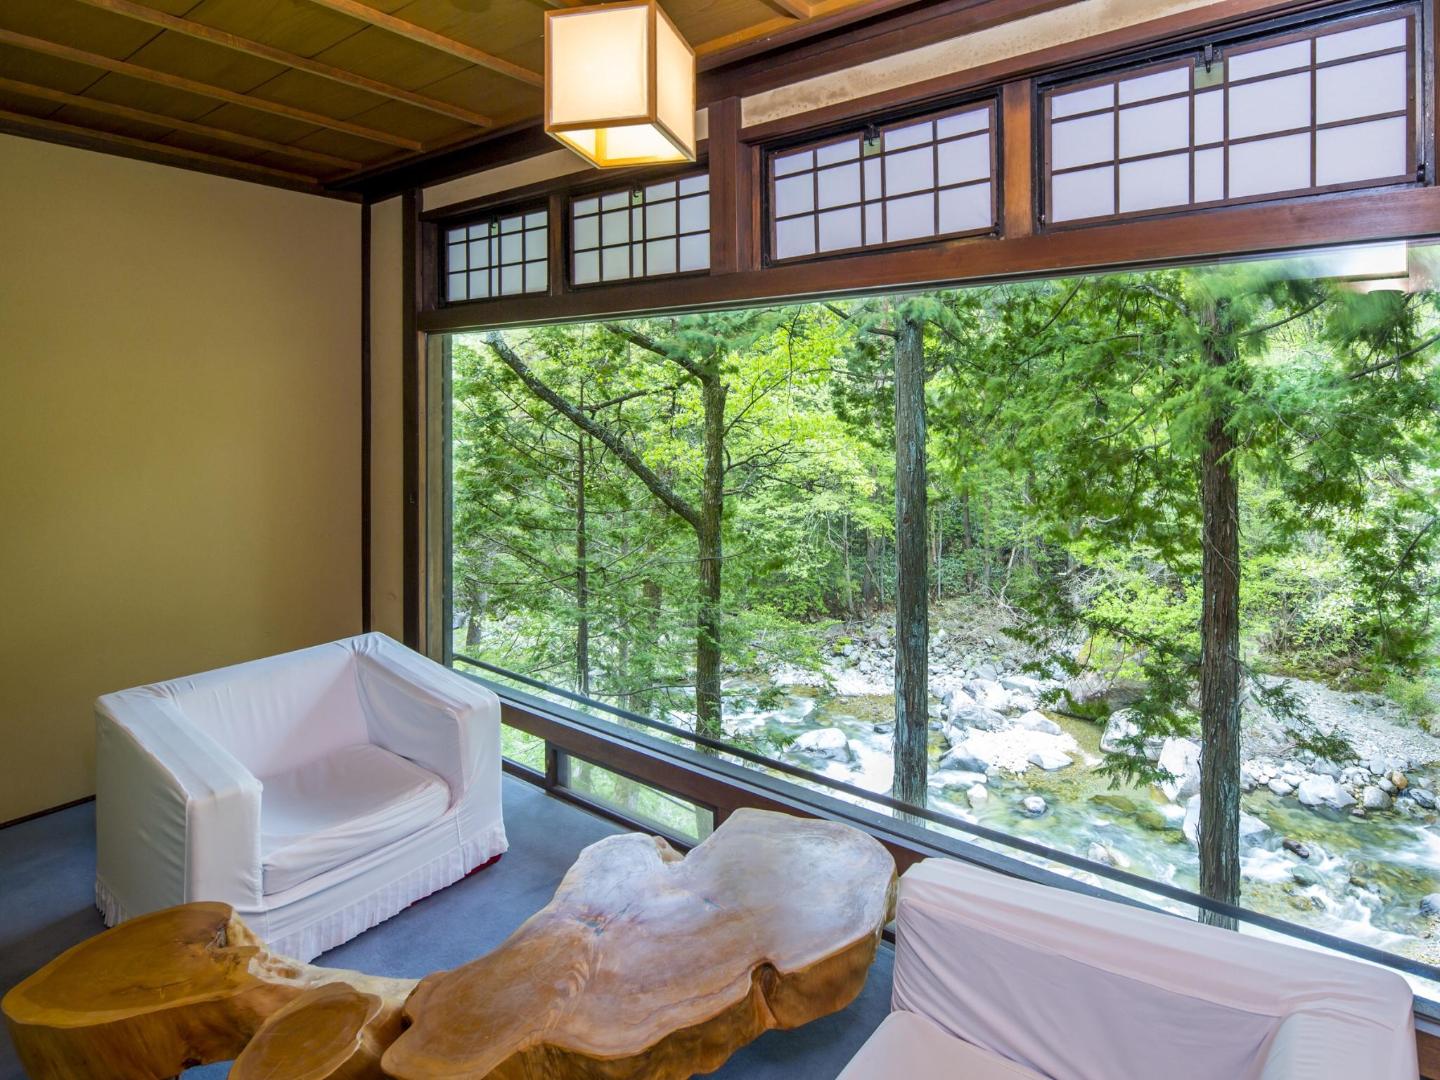 What are the best Ryokans hotels in Takayama?